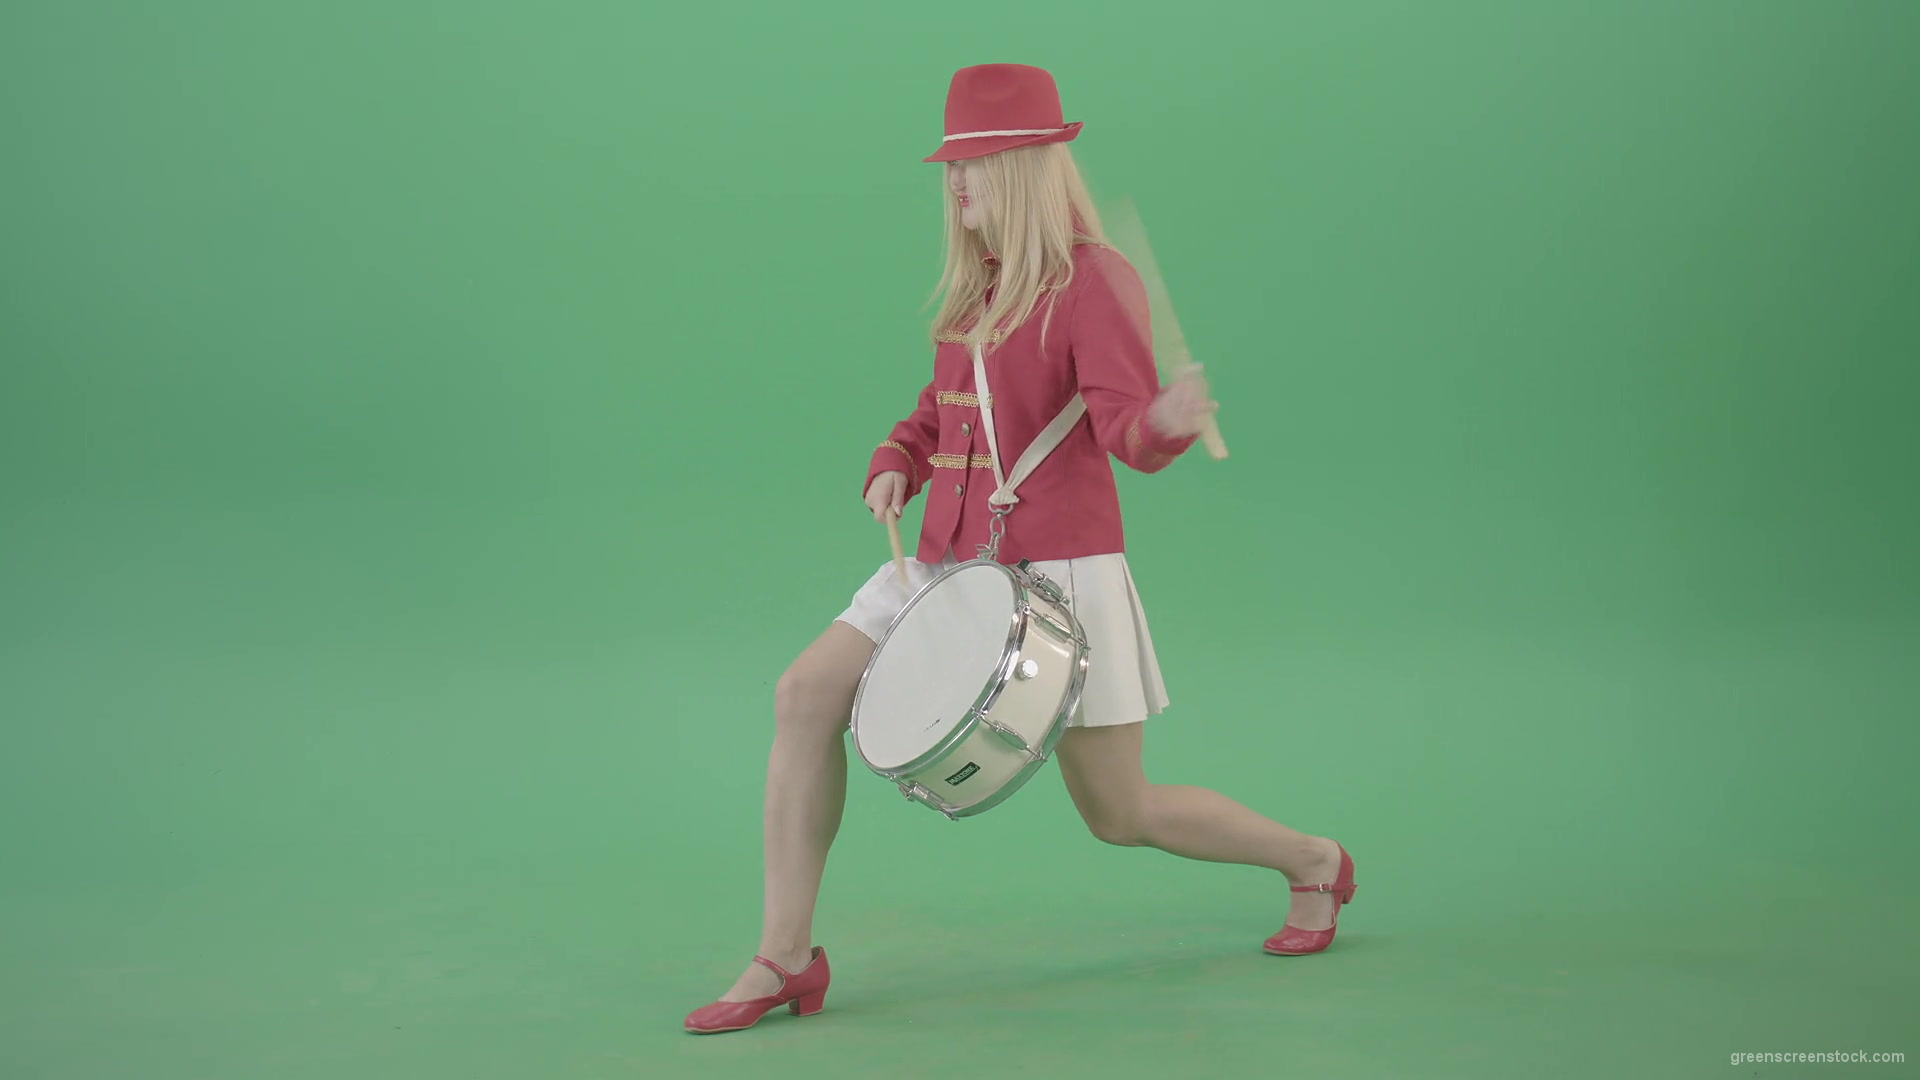 Blondie-is-ready-for-adventure-making-beats-on-snare-drum-isolated-on-Green-Screen-4K-Video-Footage-1920_005 Green Screen Stock